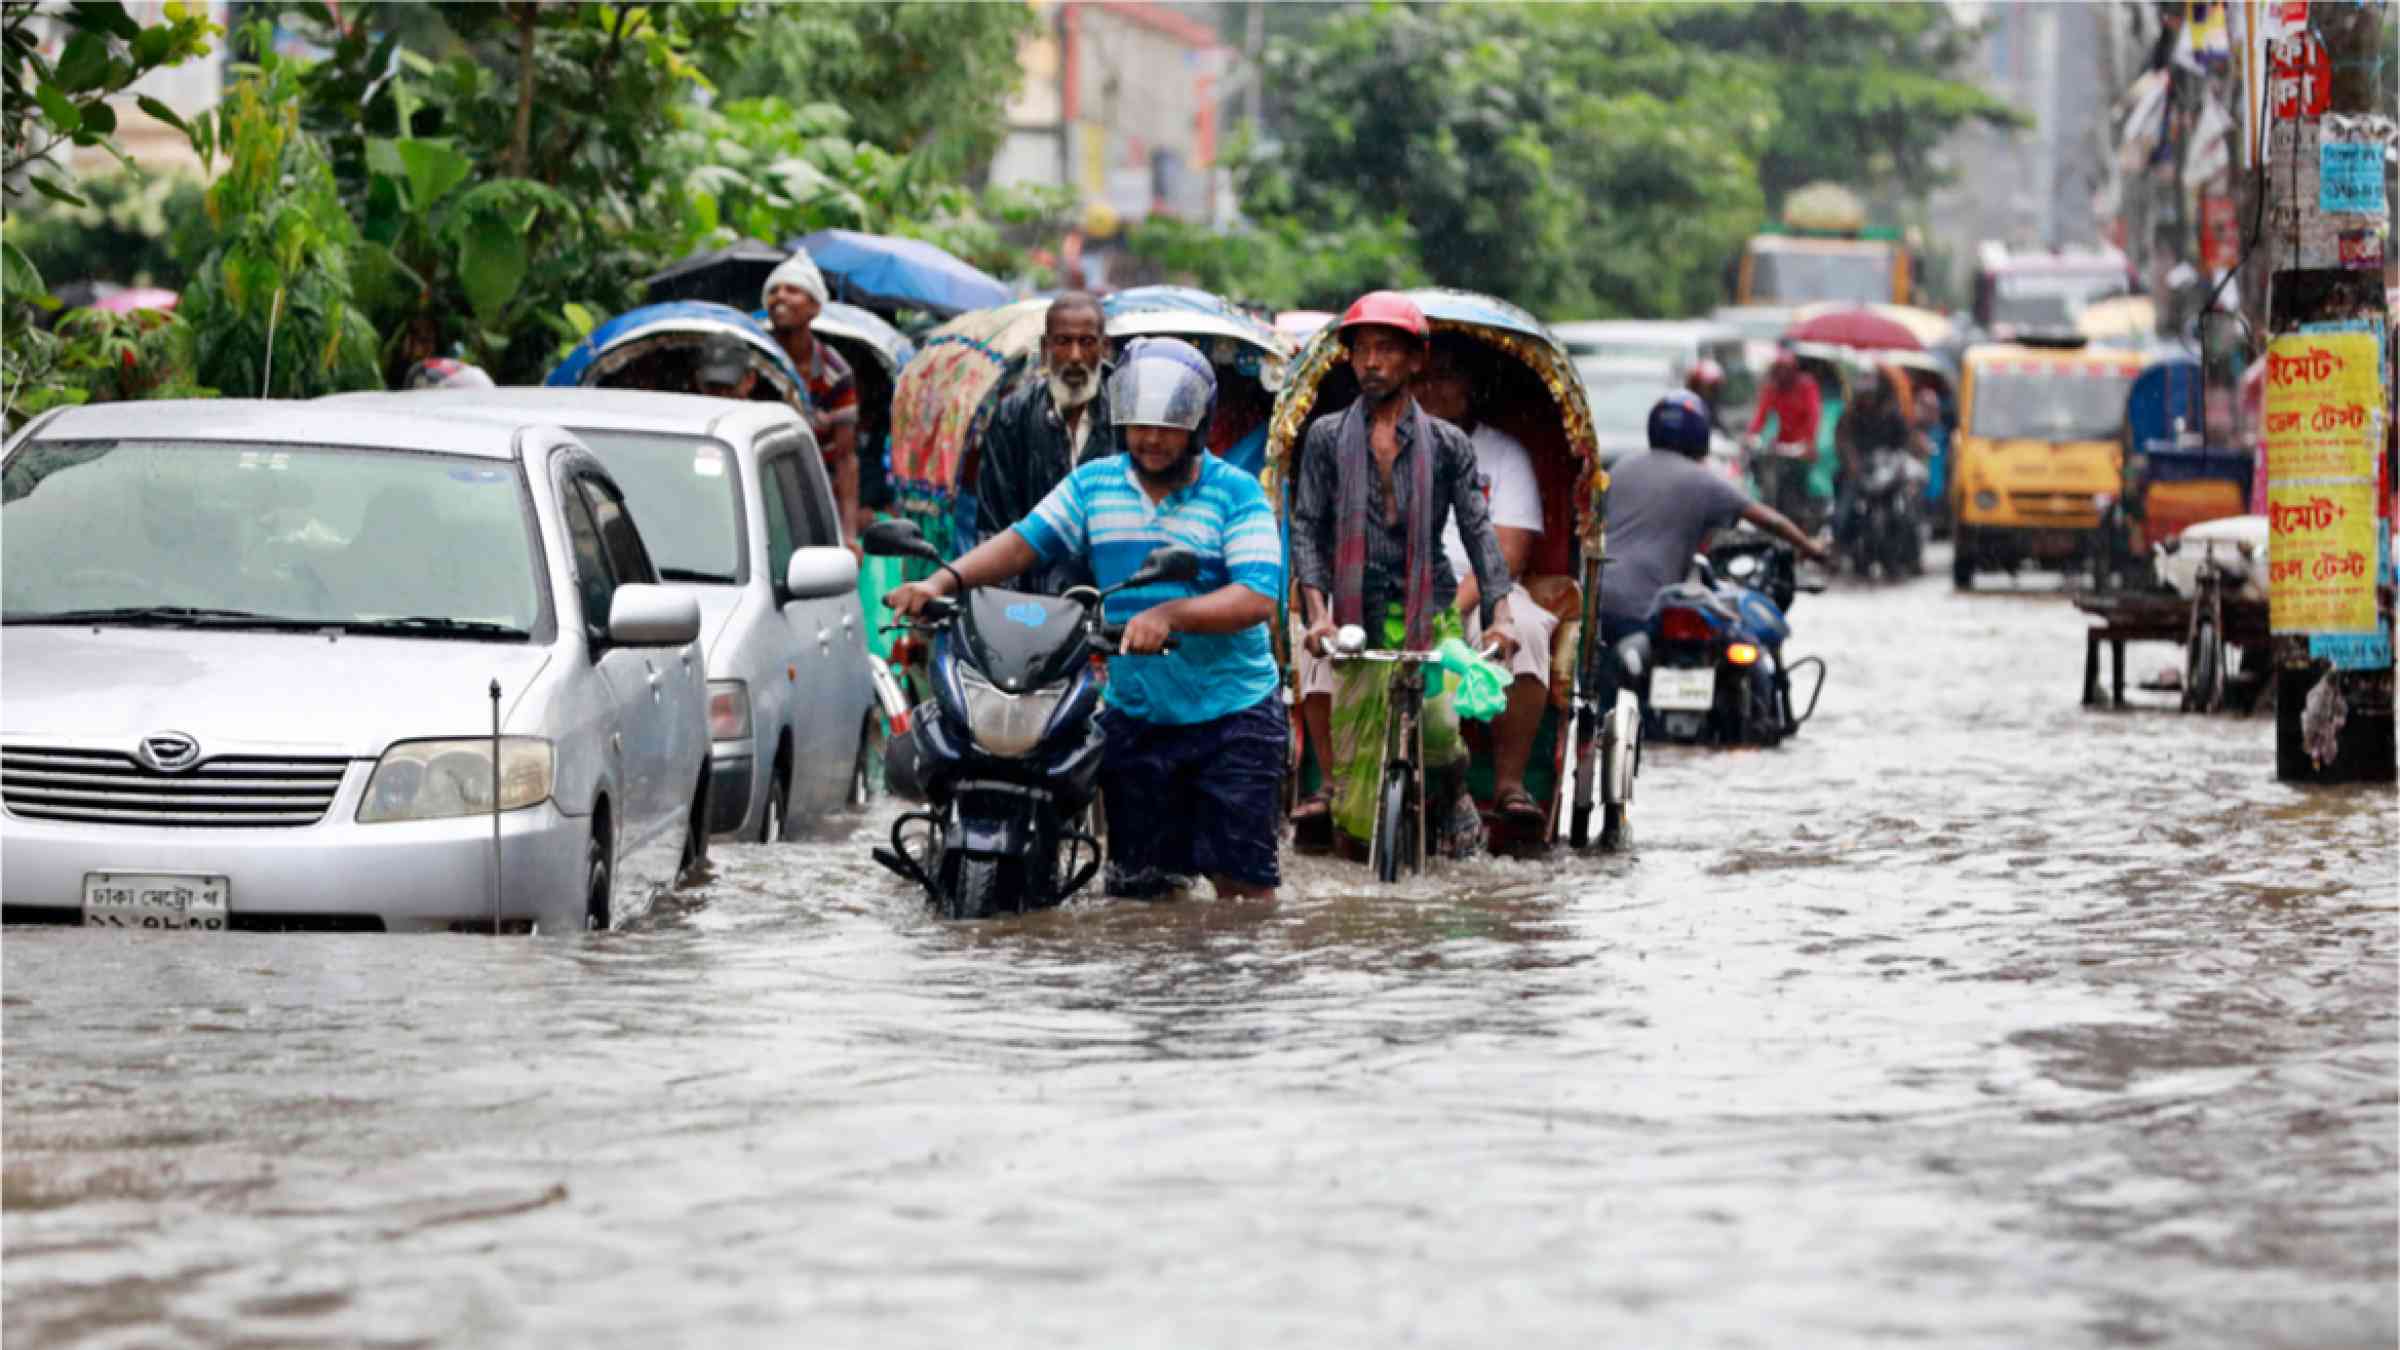 Dhaka residents wade in floodwater after heavy rains